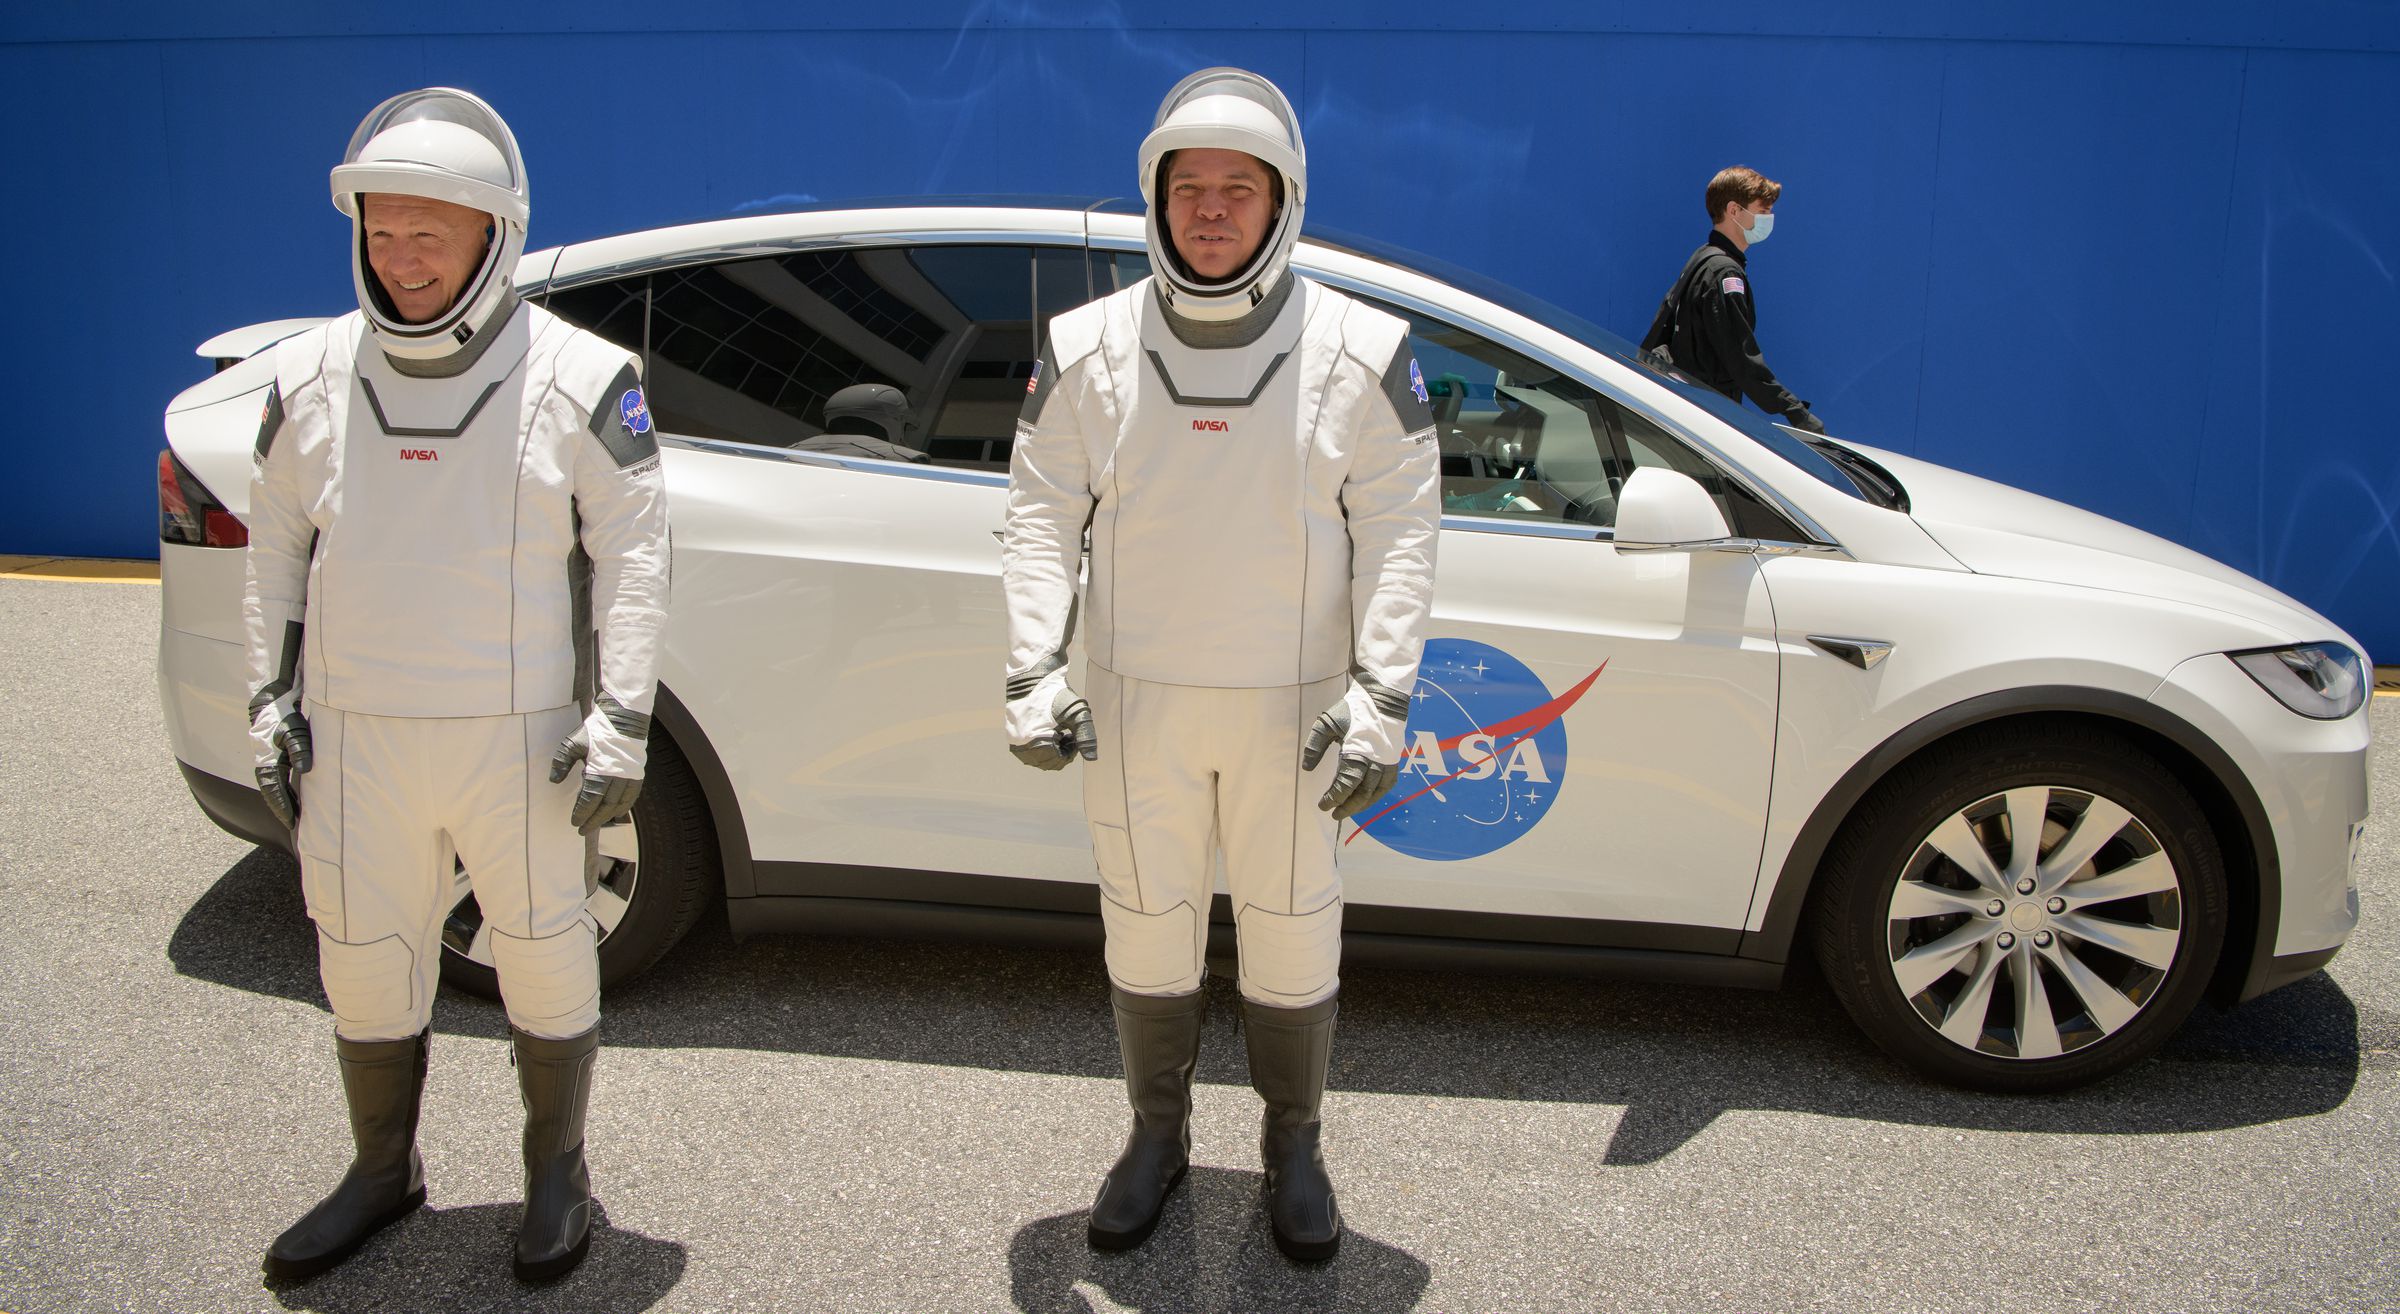 Hurley (R) and Behnken (L) outside of the Tesla that will take them to the launchpad.